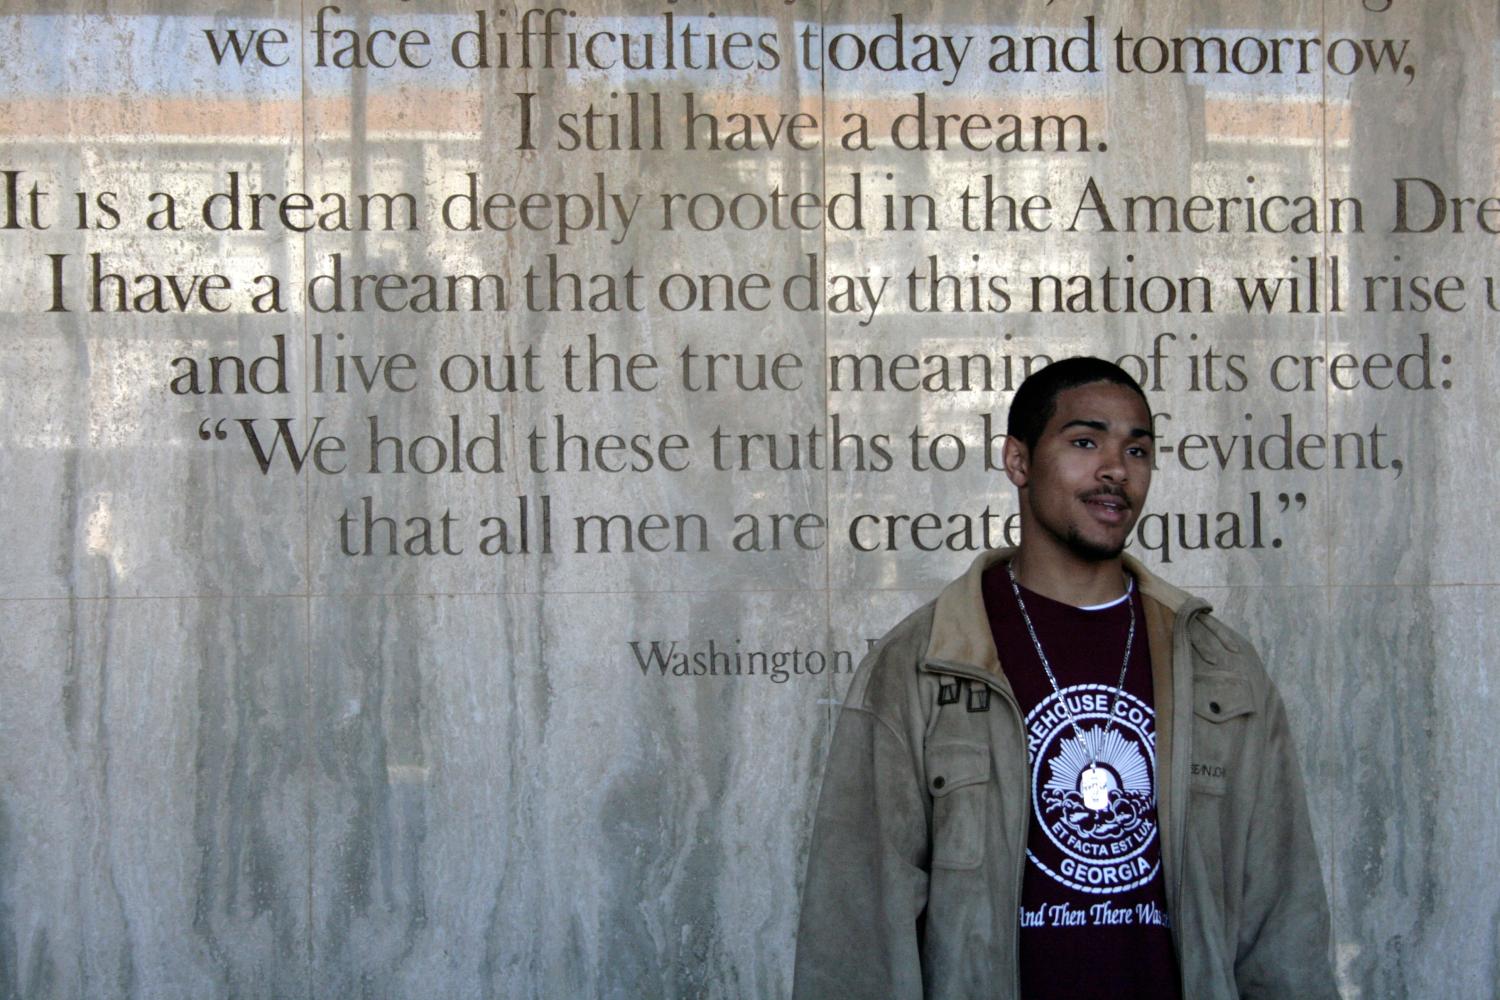 Thomas Coverson, 19, a freshman at Morehouse College in Atlanta, Georgia, explains his passion for the history of the civil rights movement in front of Martin Luther King Jr.'s famous "I Have a Dream" speech" at Martin Luther King Jr. International Chapel at Morehouse College in Atlanta, Georgia, January 8, 2009. Barack Obama's election as the first black U.S. president has rekindled interest in the U.S. civil rights struggles of the 1950s and 1960s at a time of continuing wide disparities in income, education and health care between whites and minority groups. Picture taken January 8, 2009. REUTERS/Andrea Shalal-Esa (UNITED STATES)